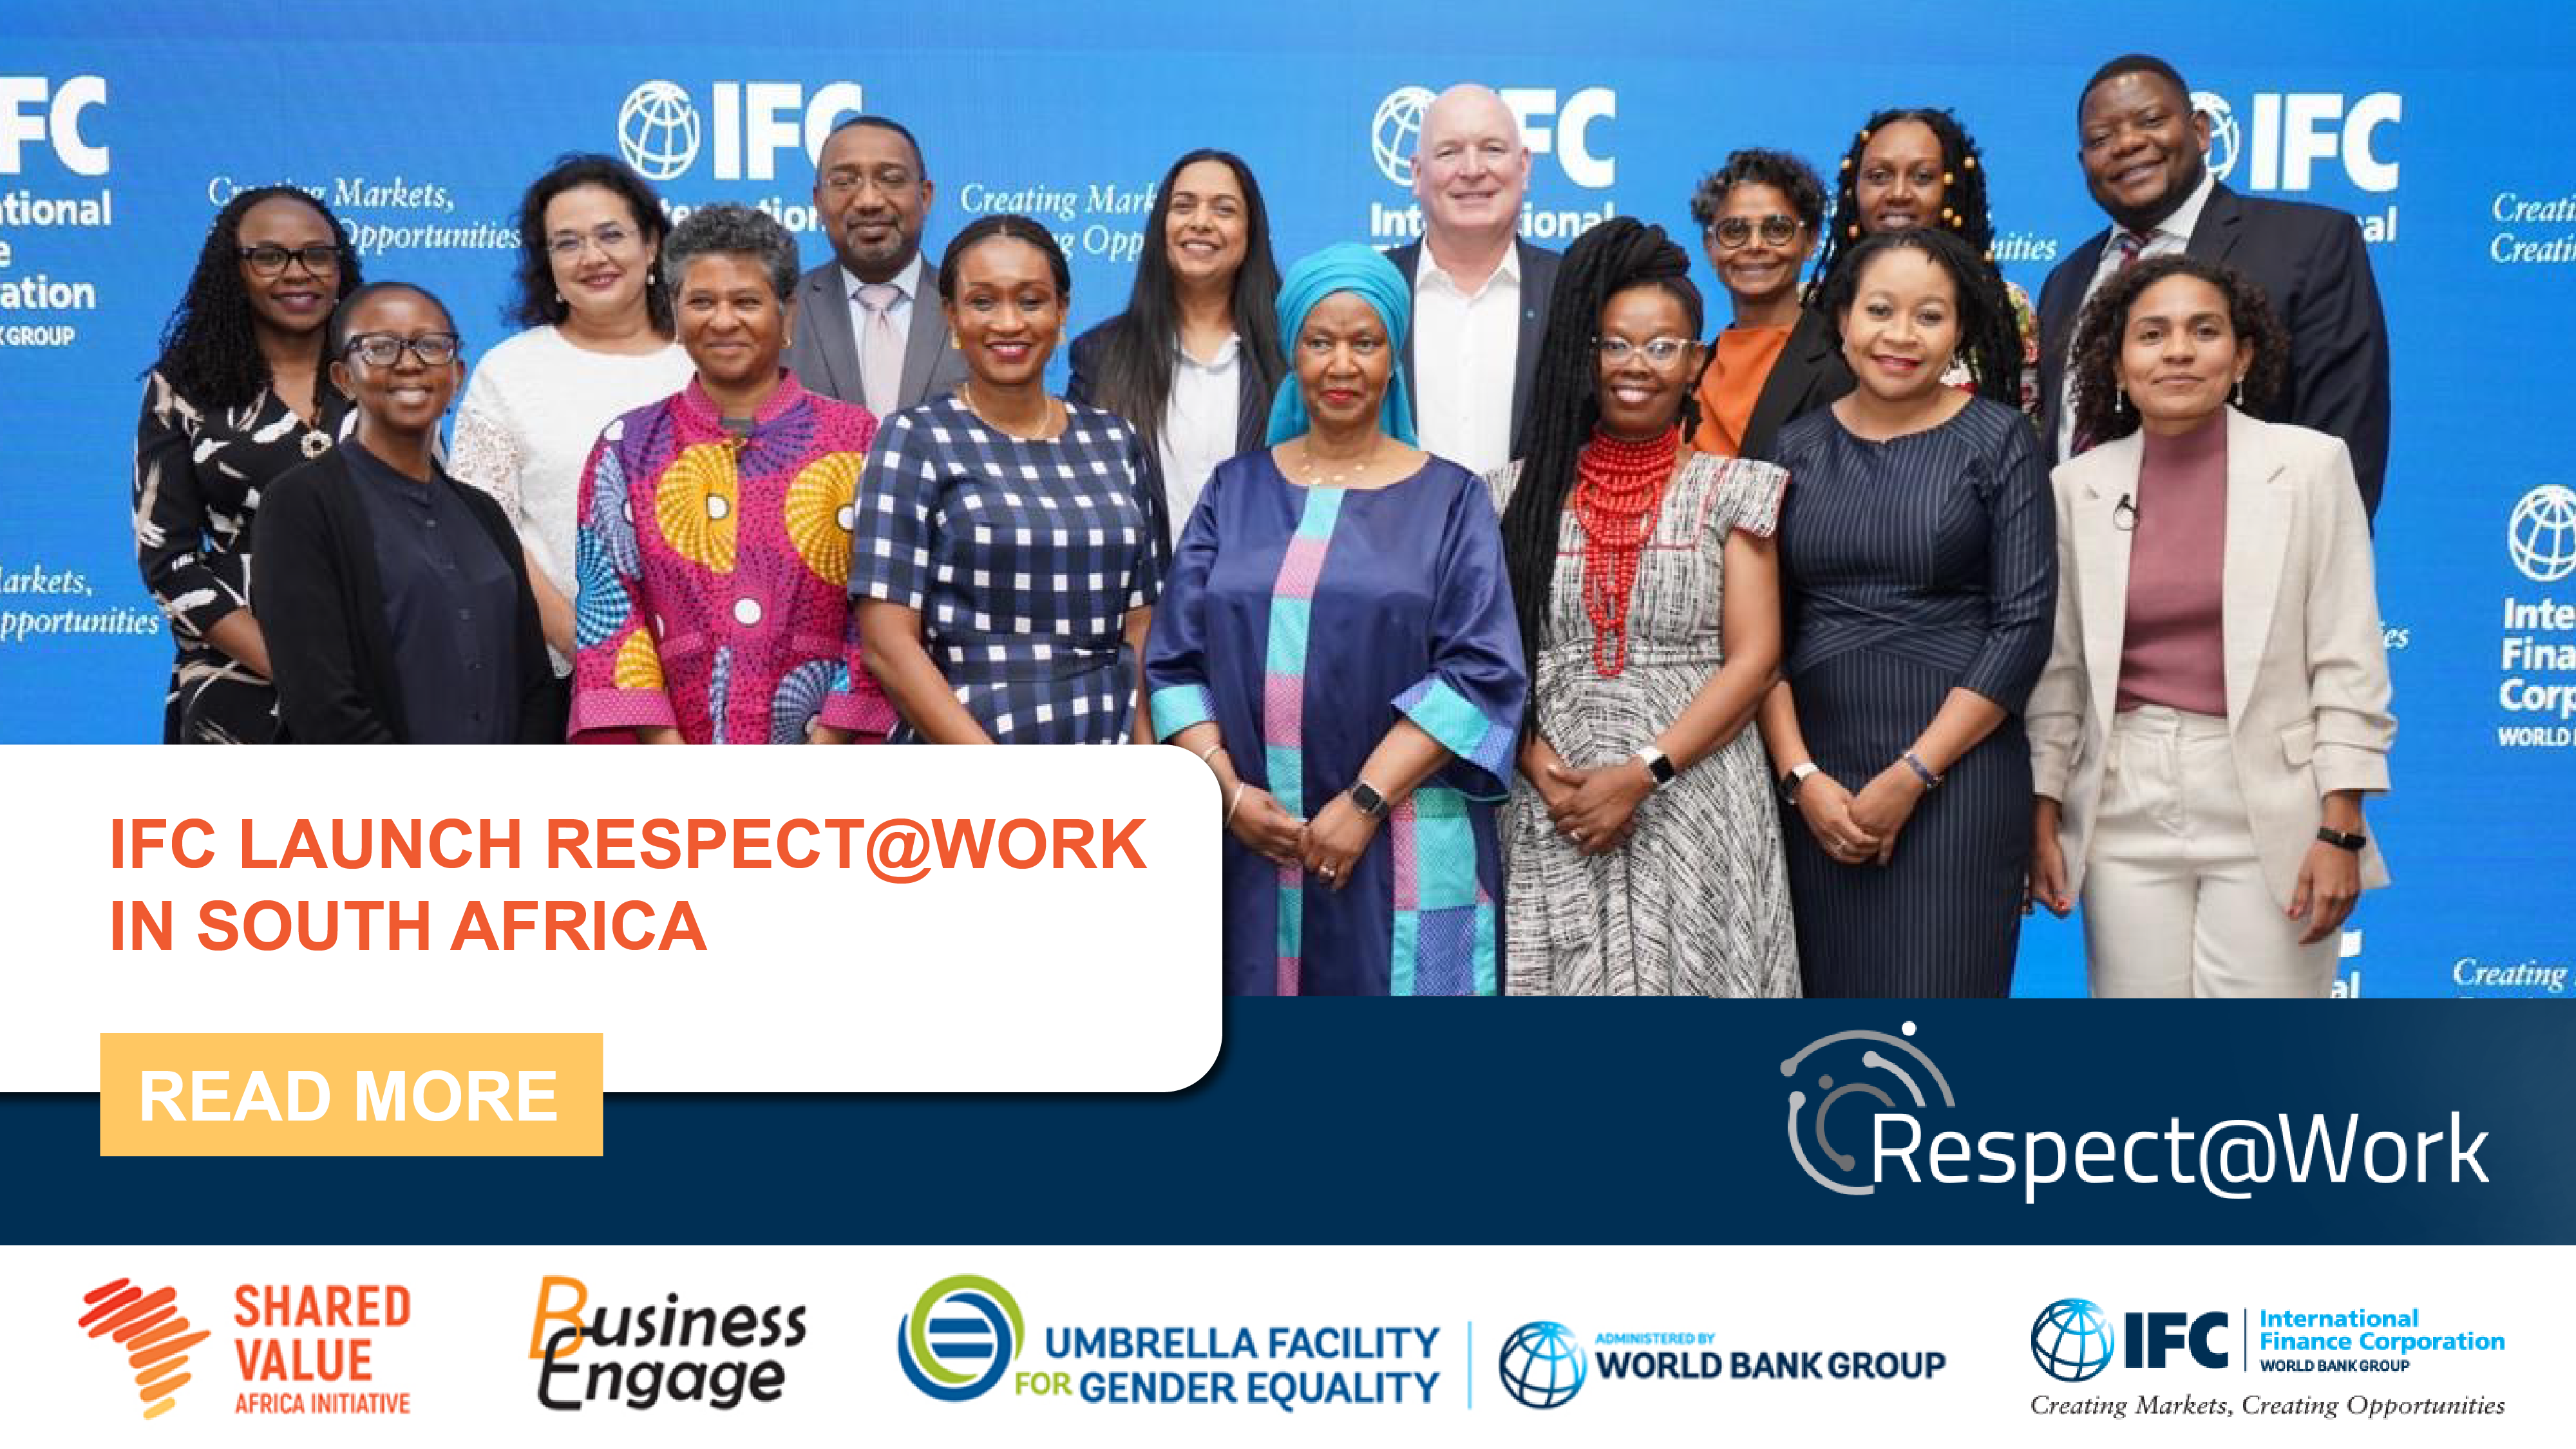 IFC Launch Respect@Work in South Africa